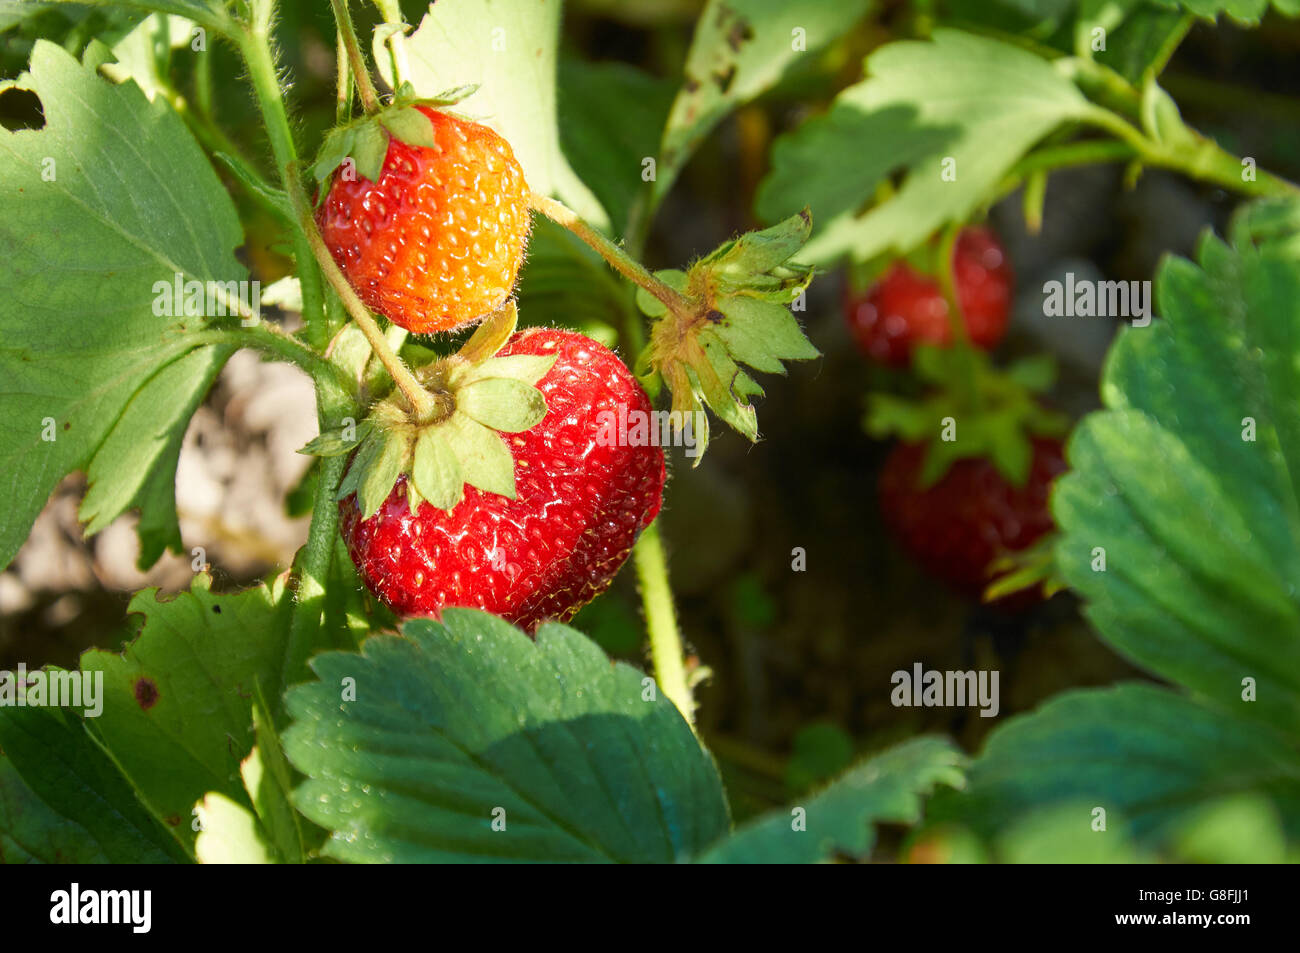 Close up photo of strawberries in evening light Stock Photo